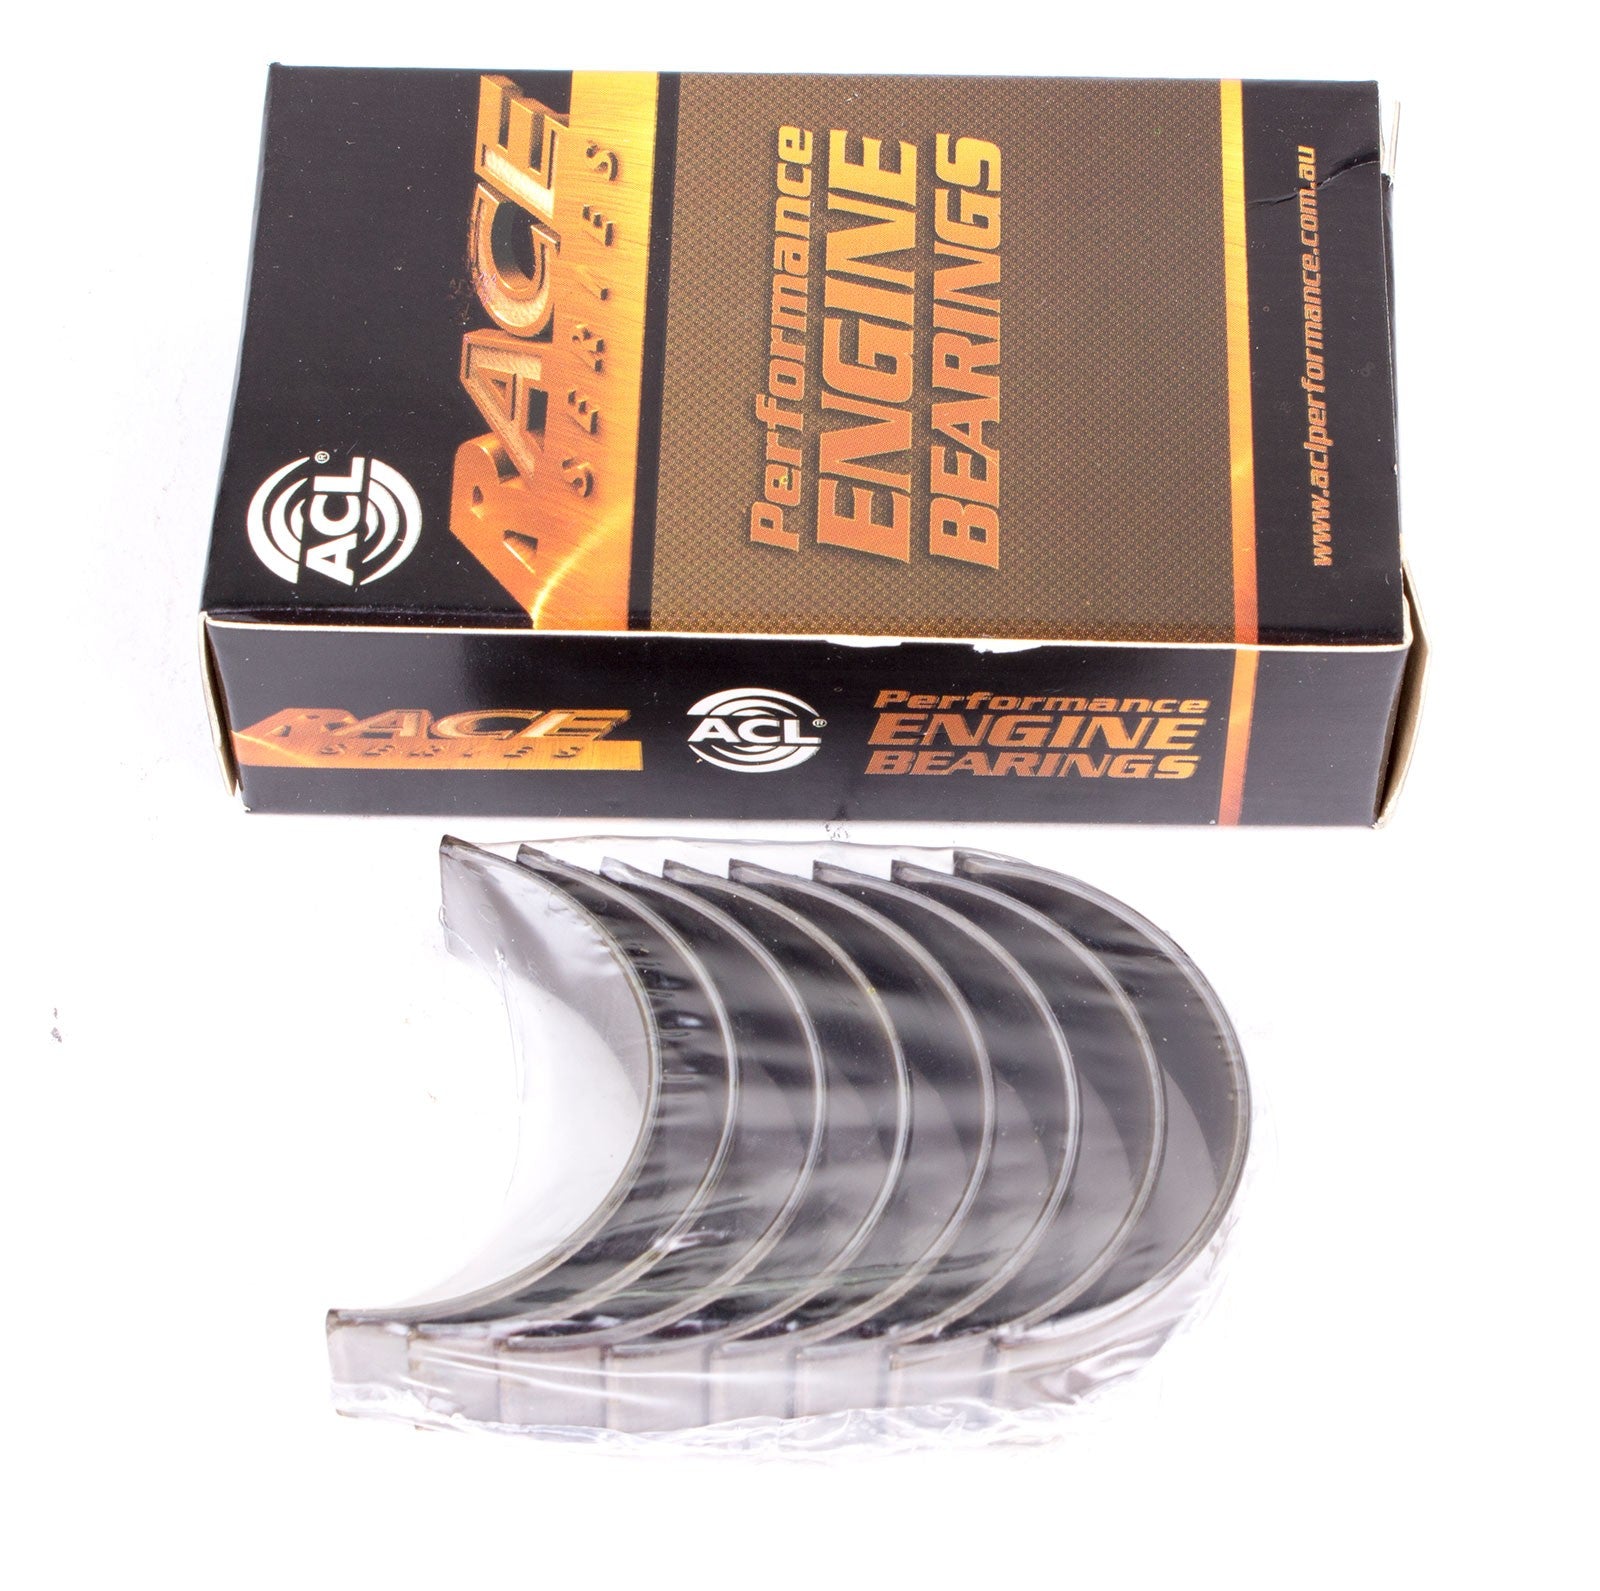 ACL 5M2357H-010 Main bearing set (ACL Race Series) Photo-0 